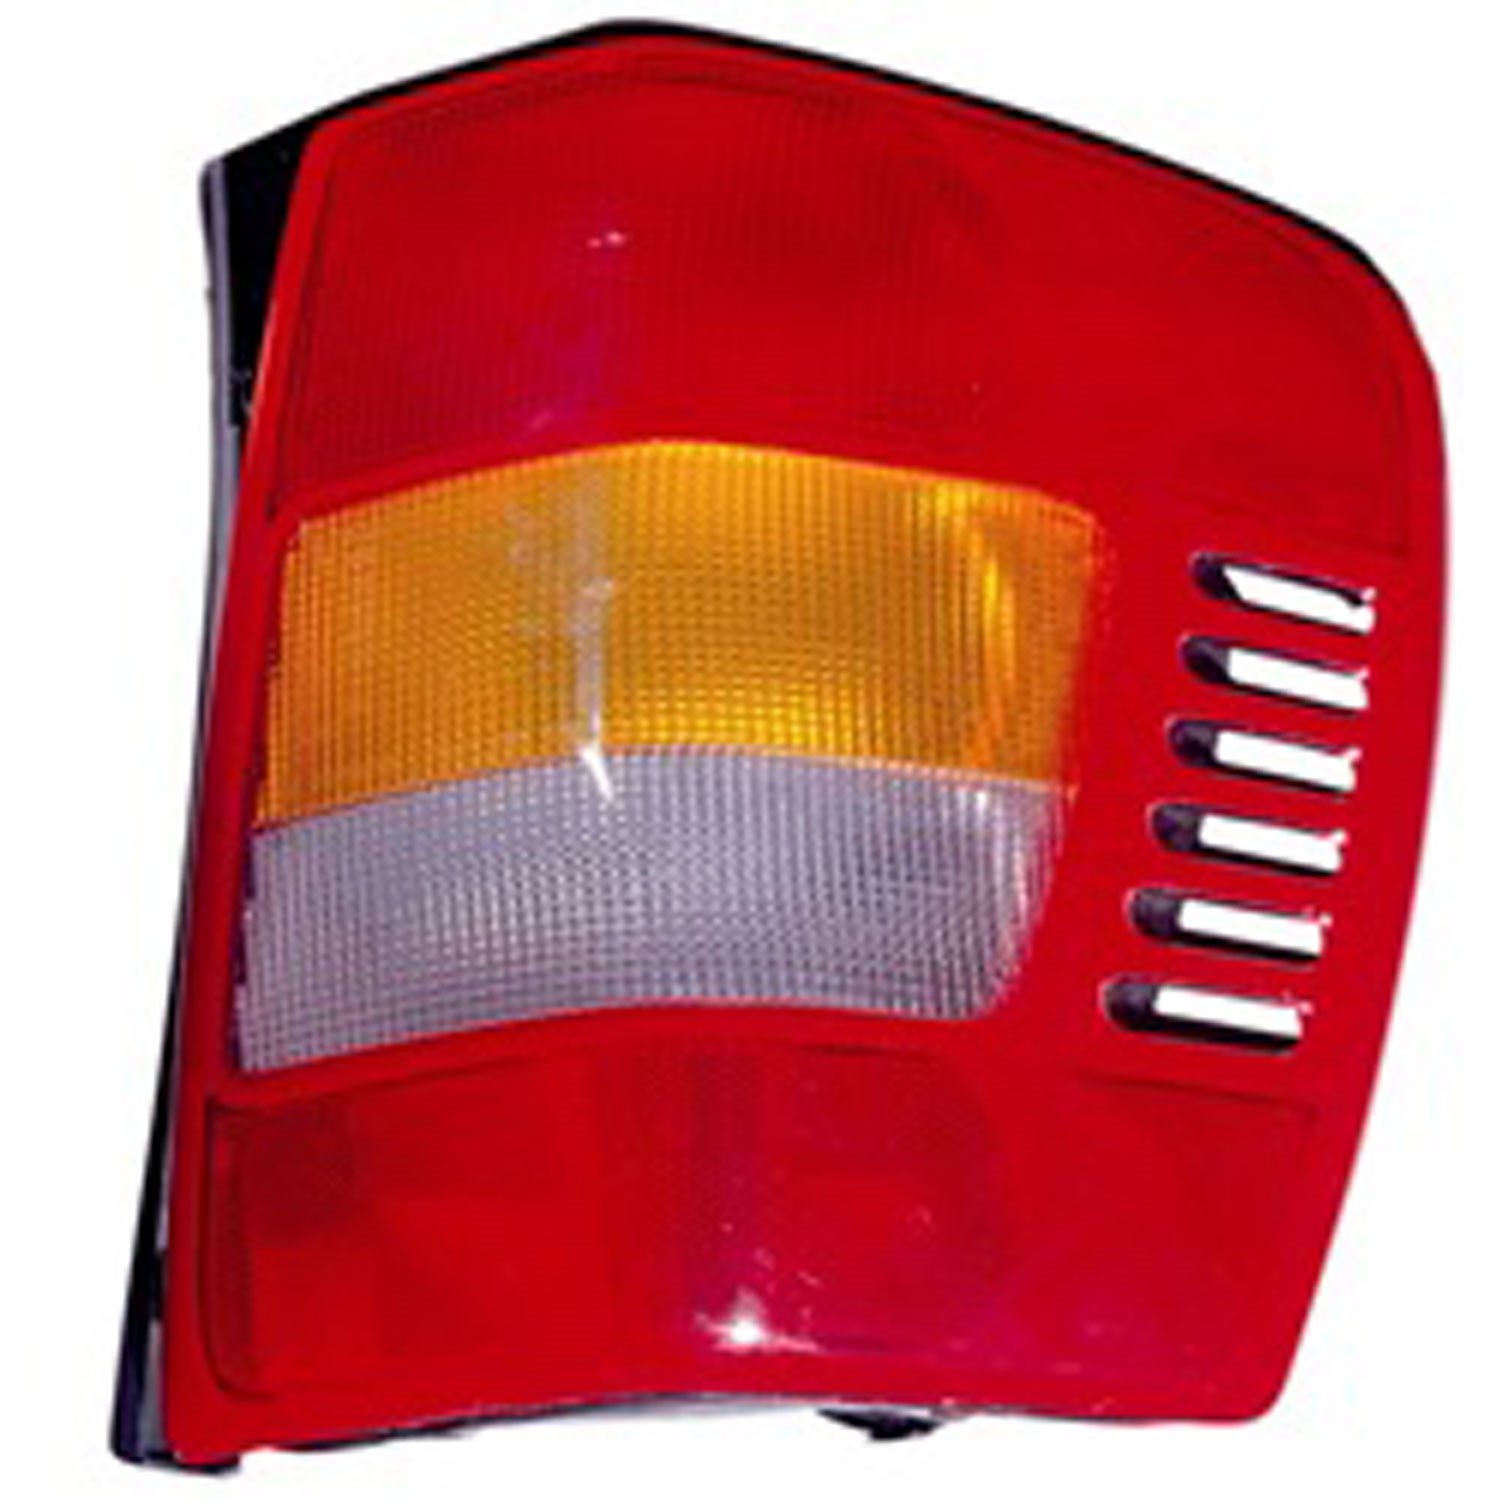 Replacement tail light assembly from Omix-ADA, Fits right